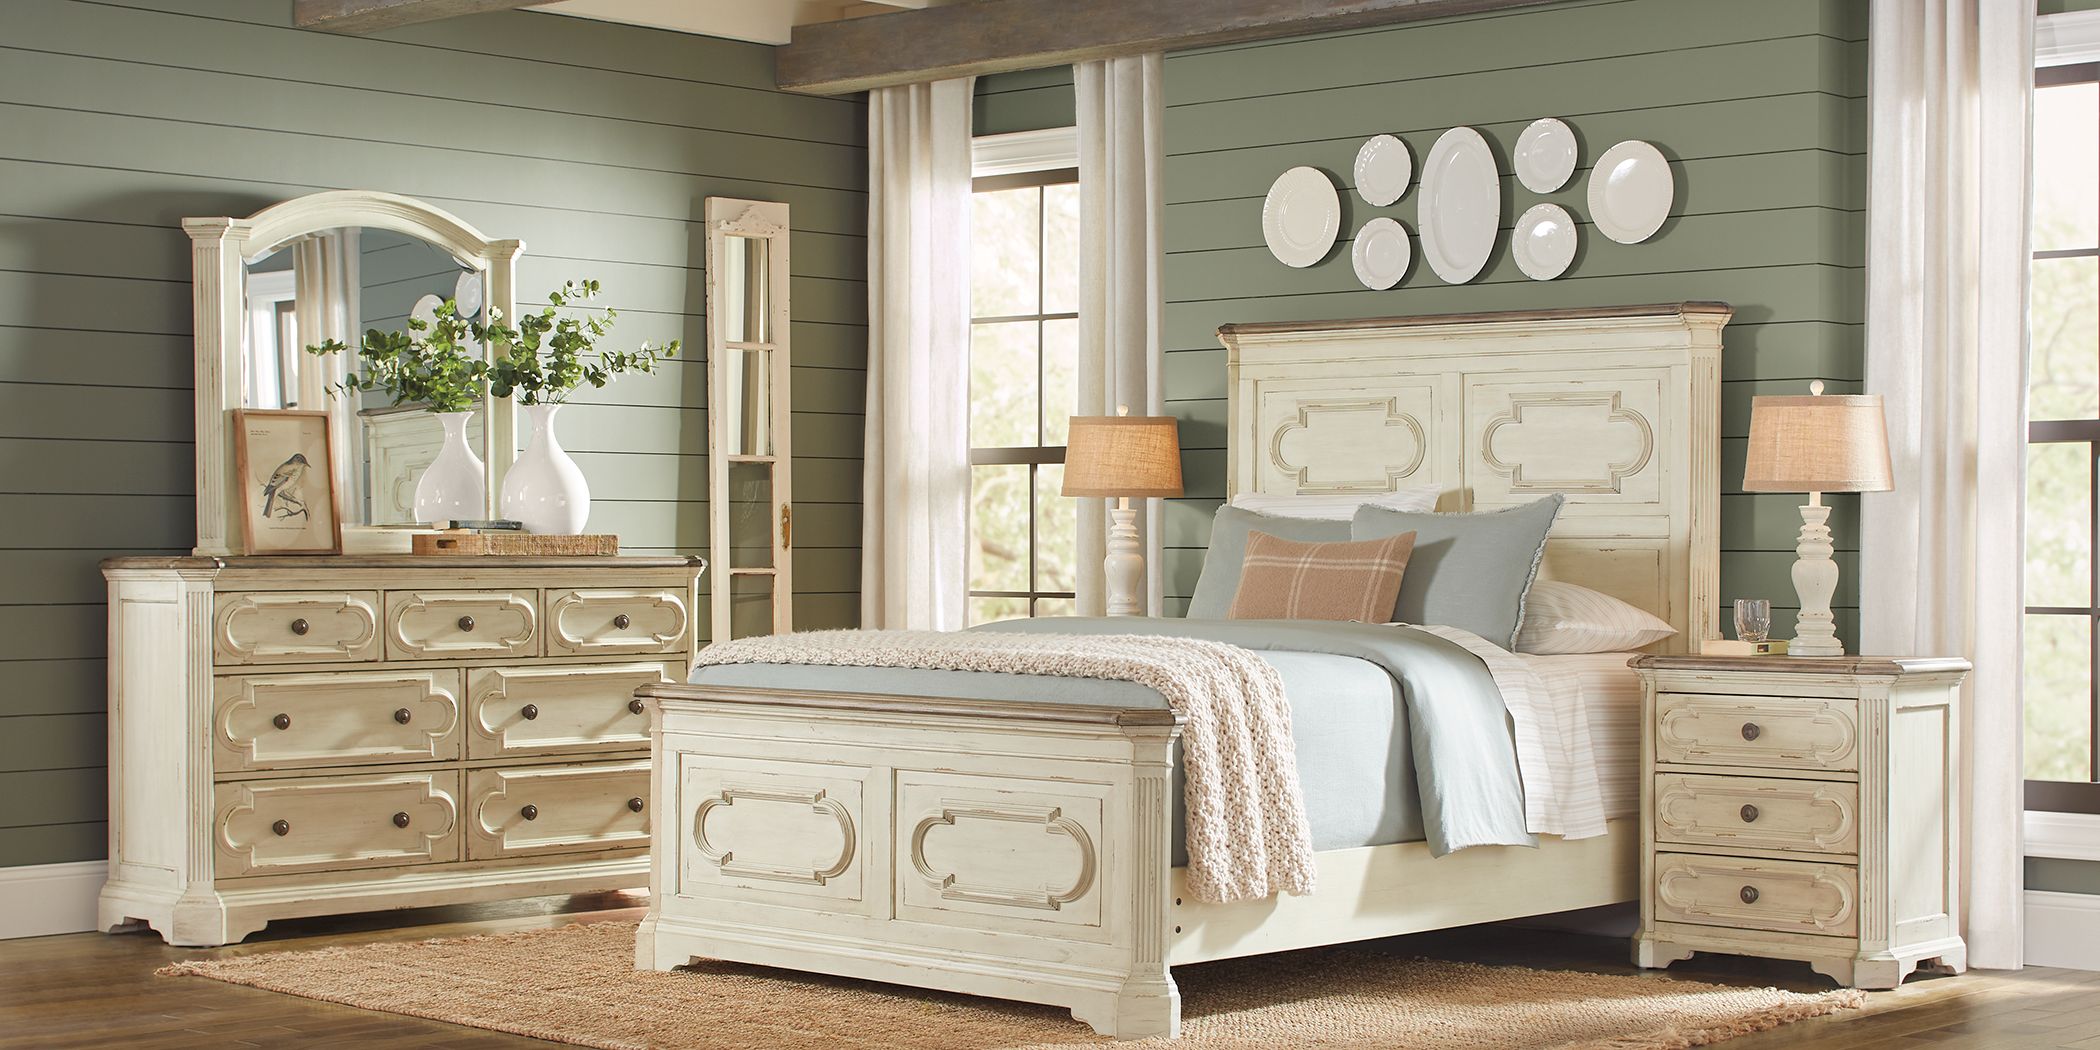 Featured image of post White And Gold Bedroom Furniture Set : Visit us online to buy cheap bedroom furniture sets and enjoy the luxurious modern lifestyle.